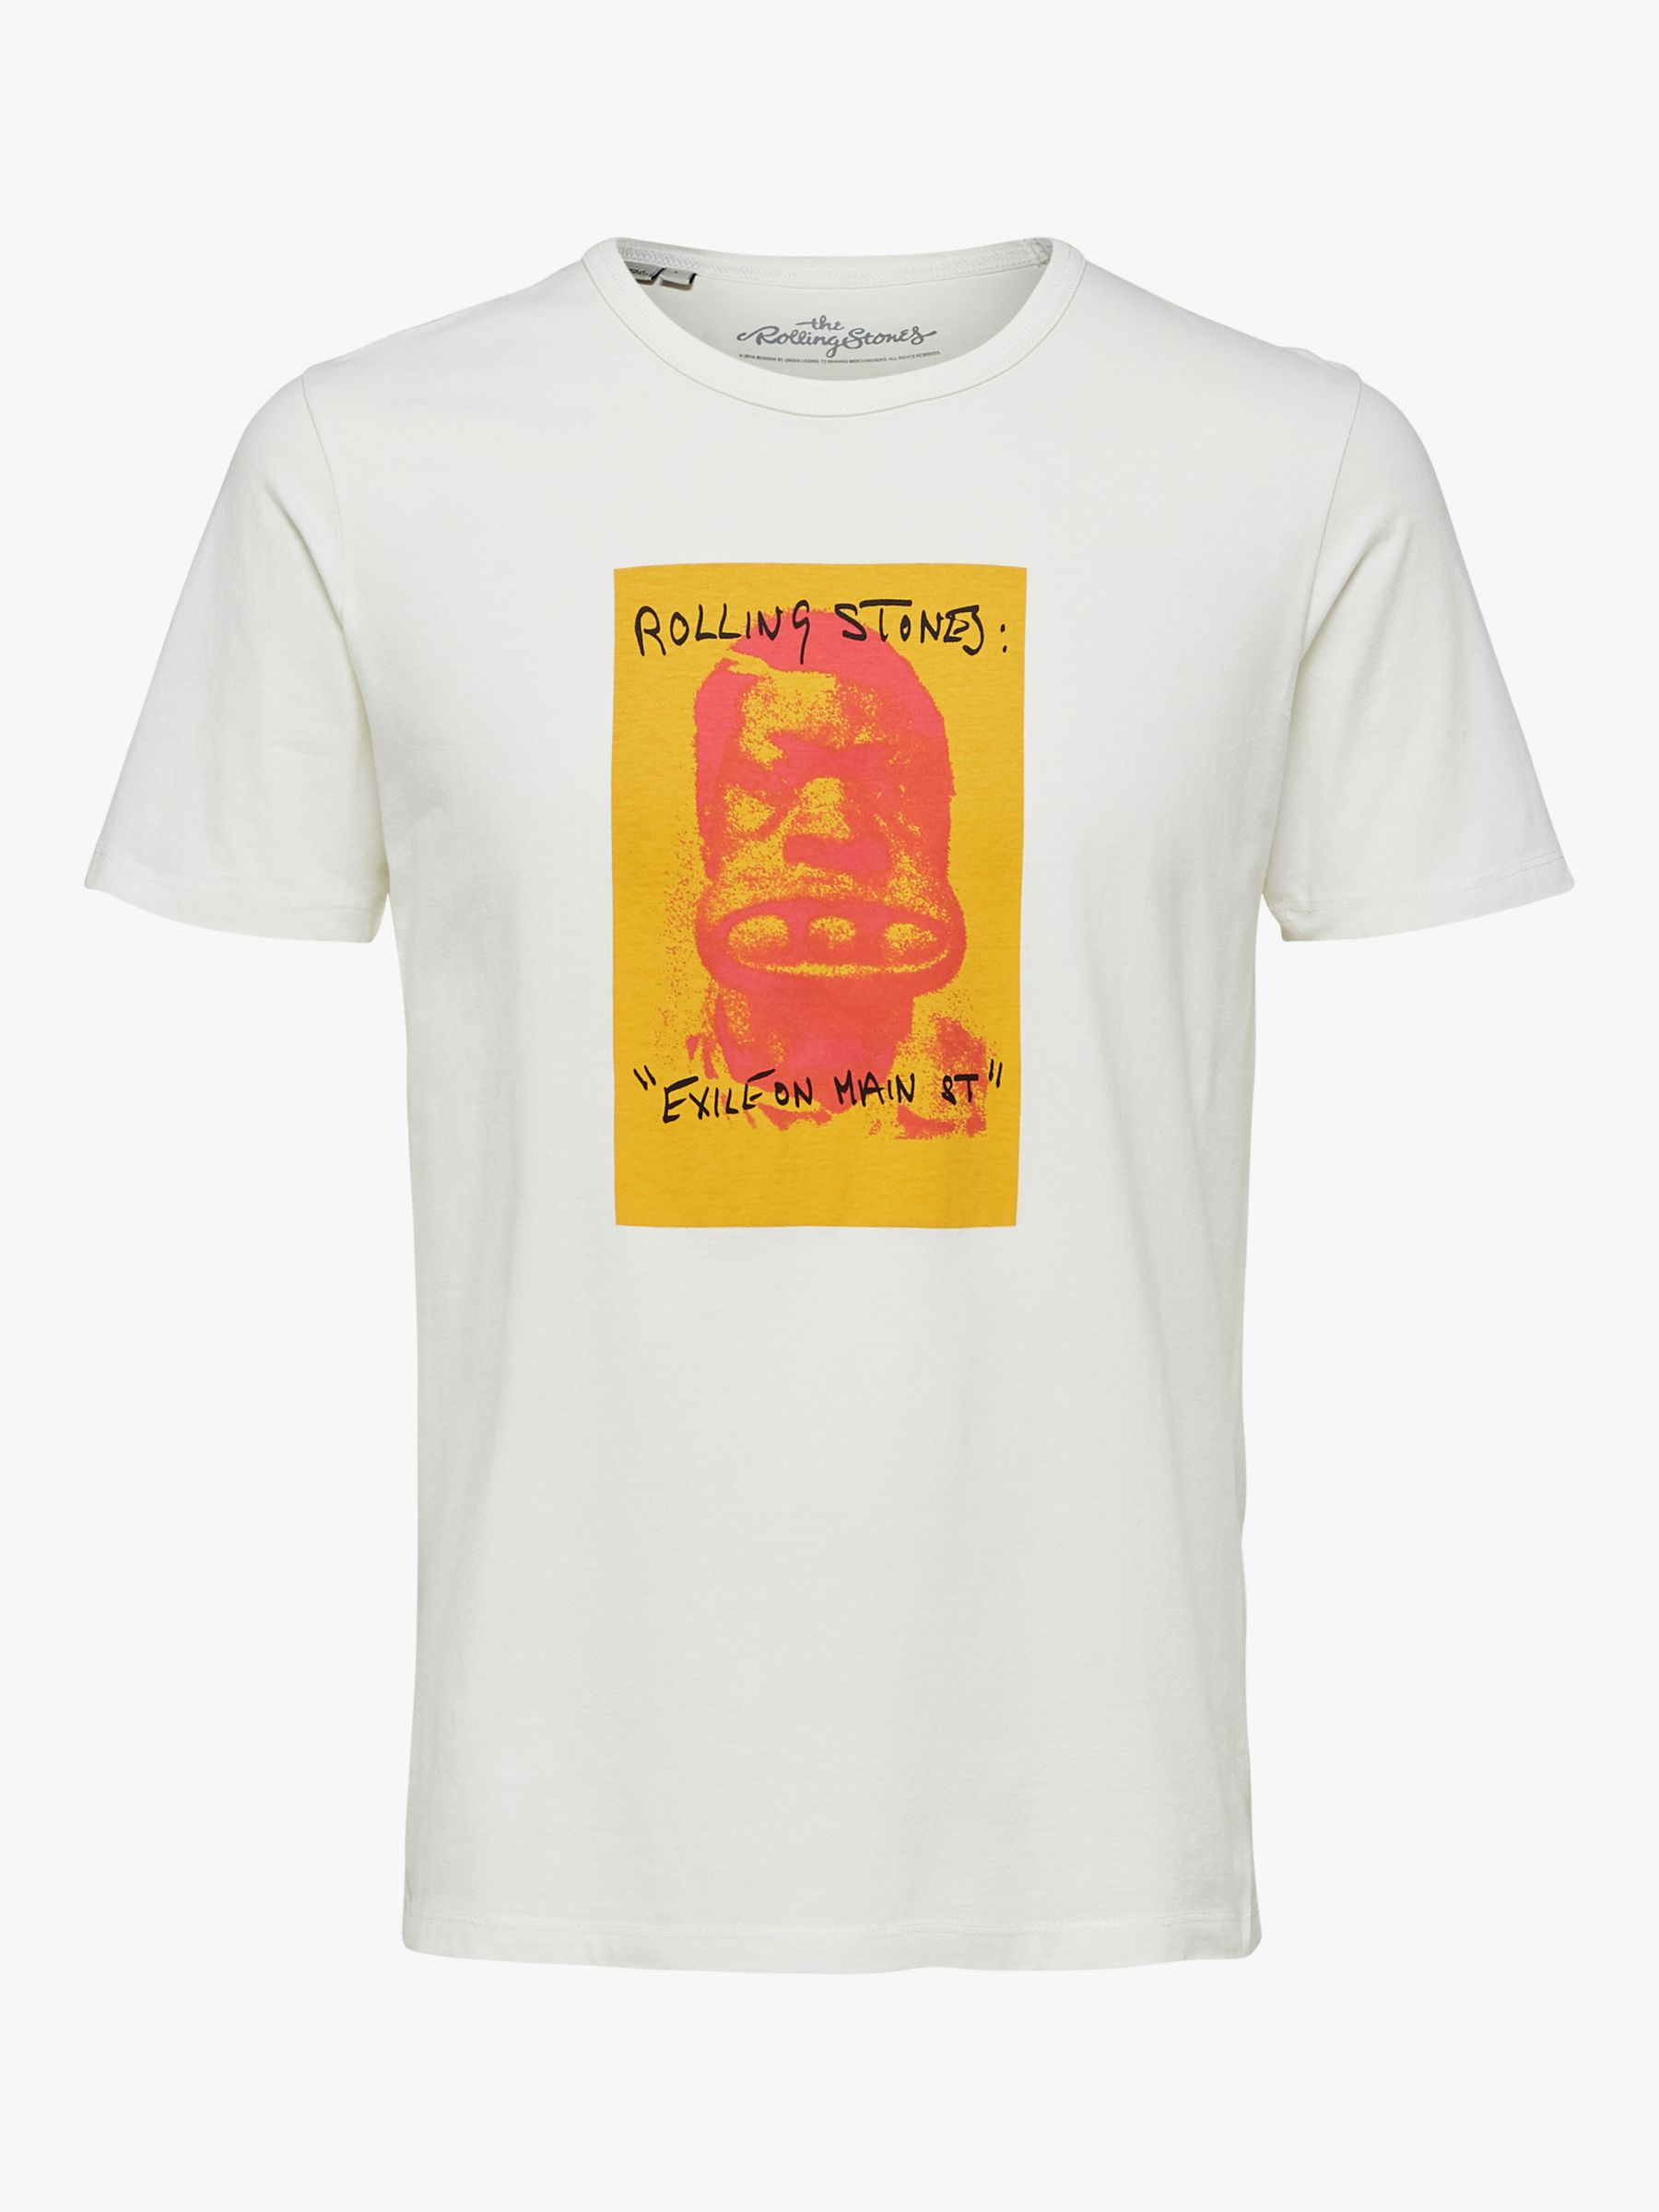 SELECTED HOMME Rolling Stones Exile on Main Street T-Shirt, Egret at ...